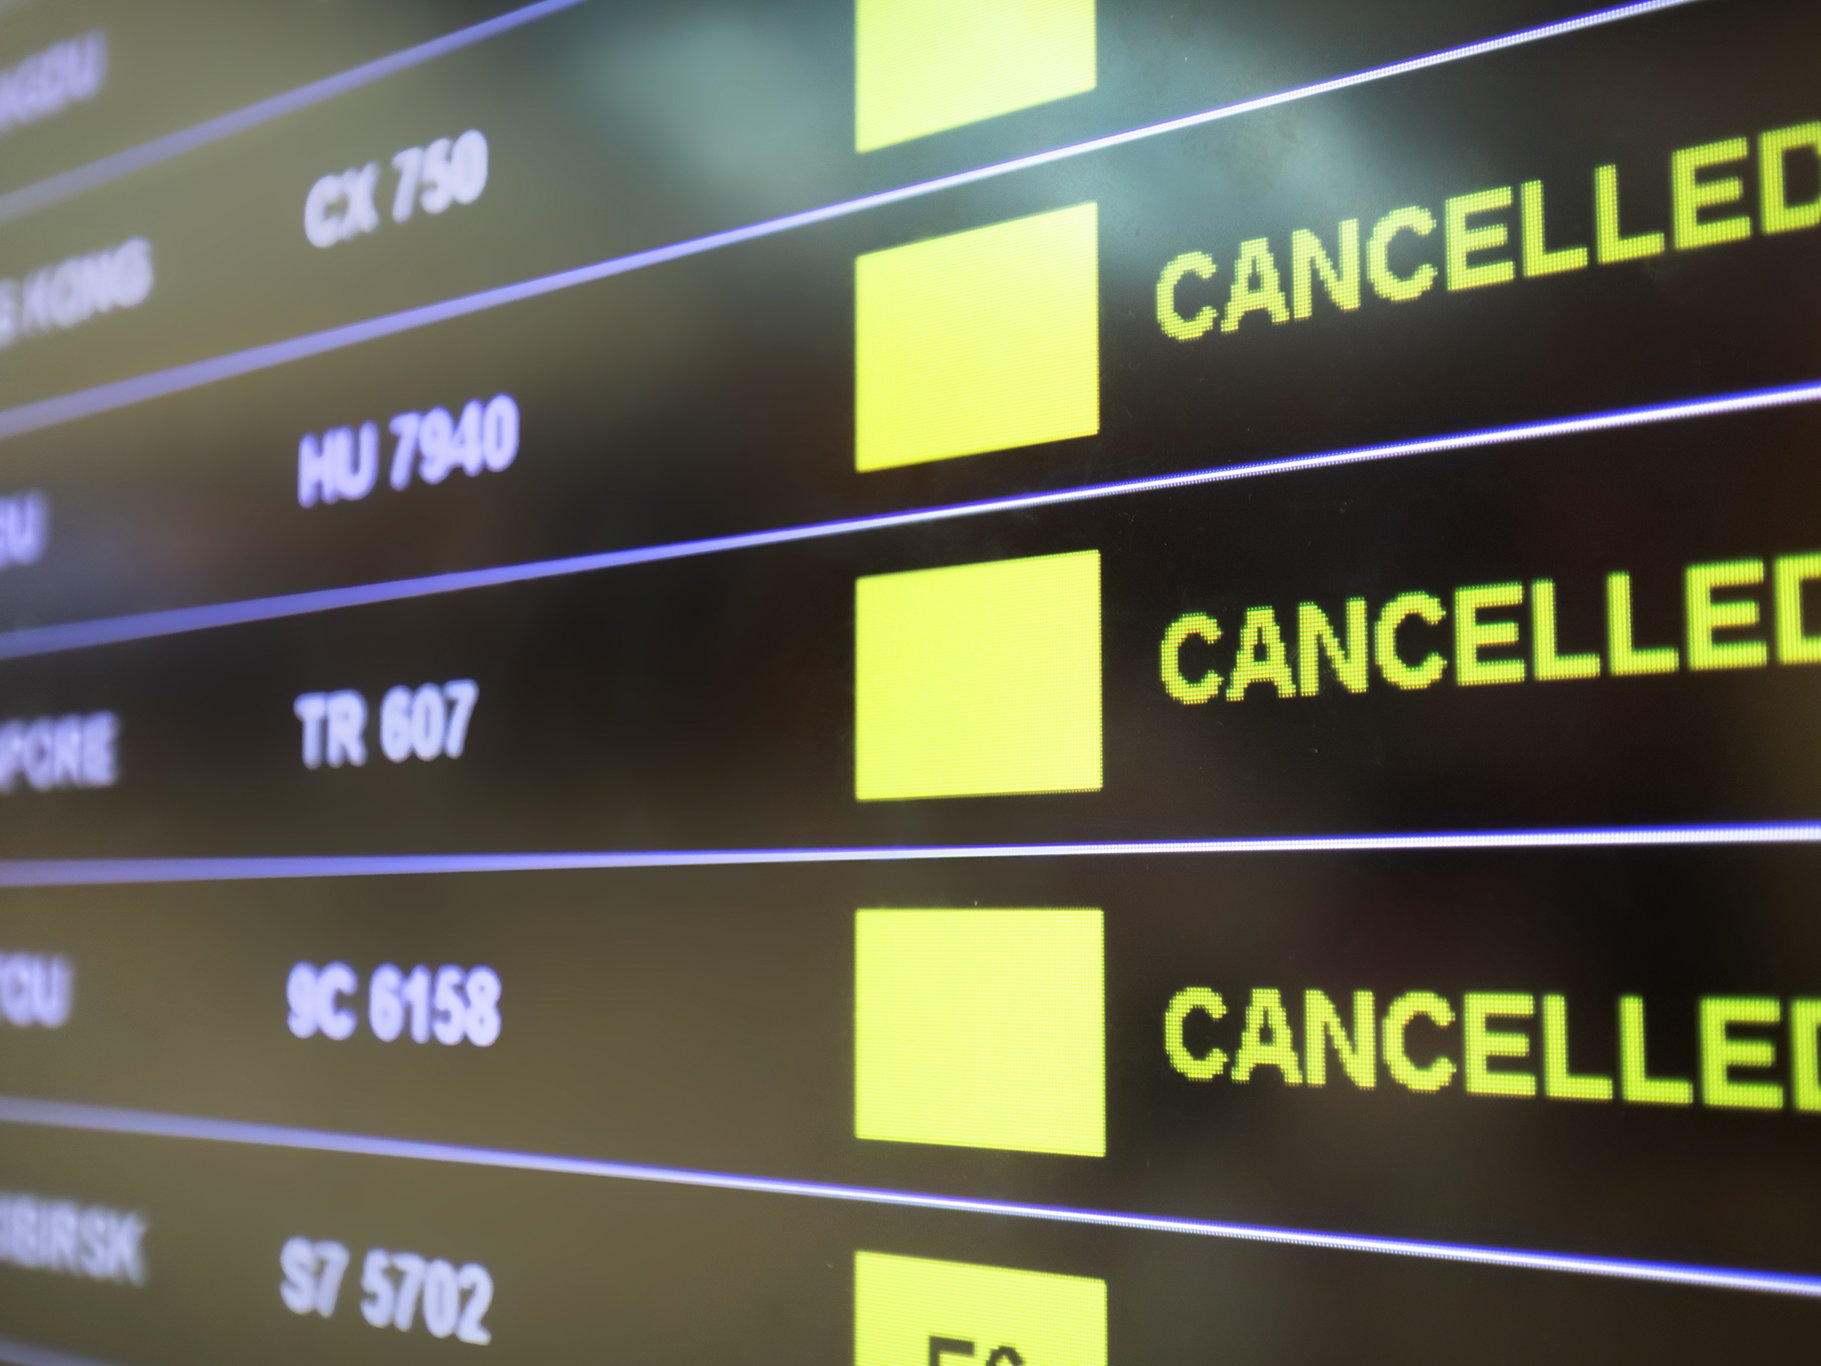 Many flights have been cancelled in the past weeks.